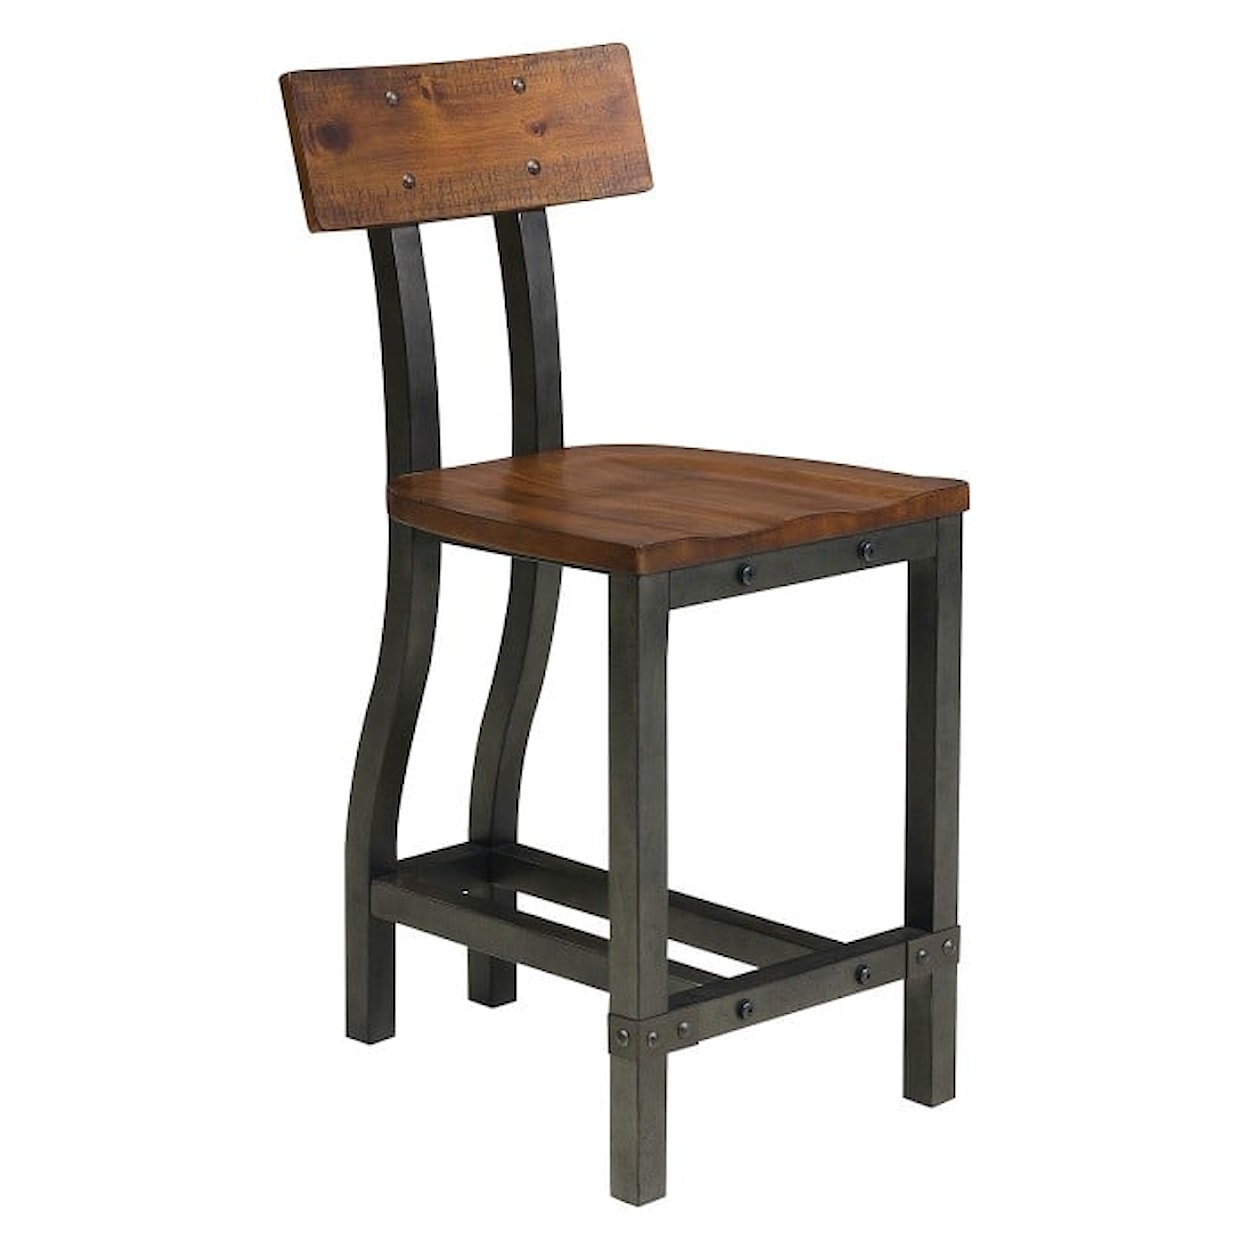 Homelegance Holverson Counter Height Chair